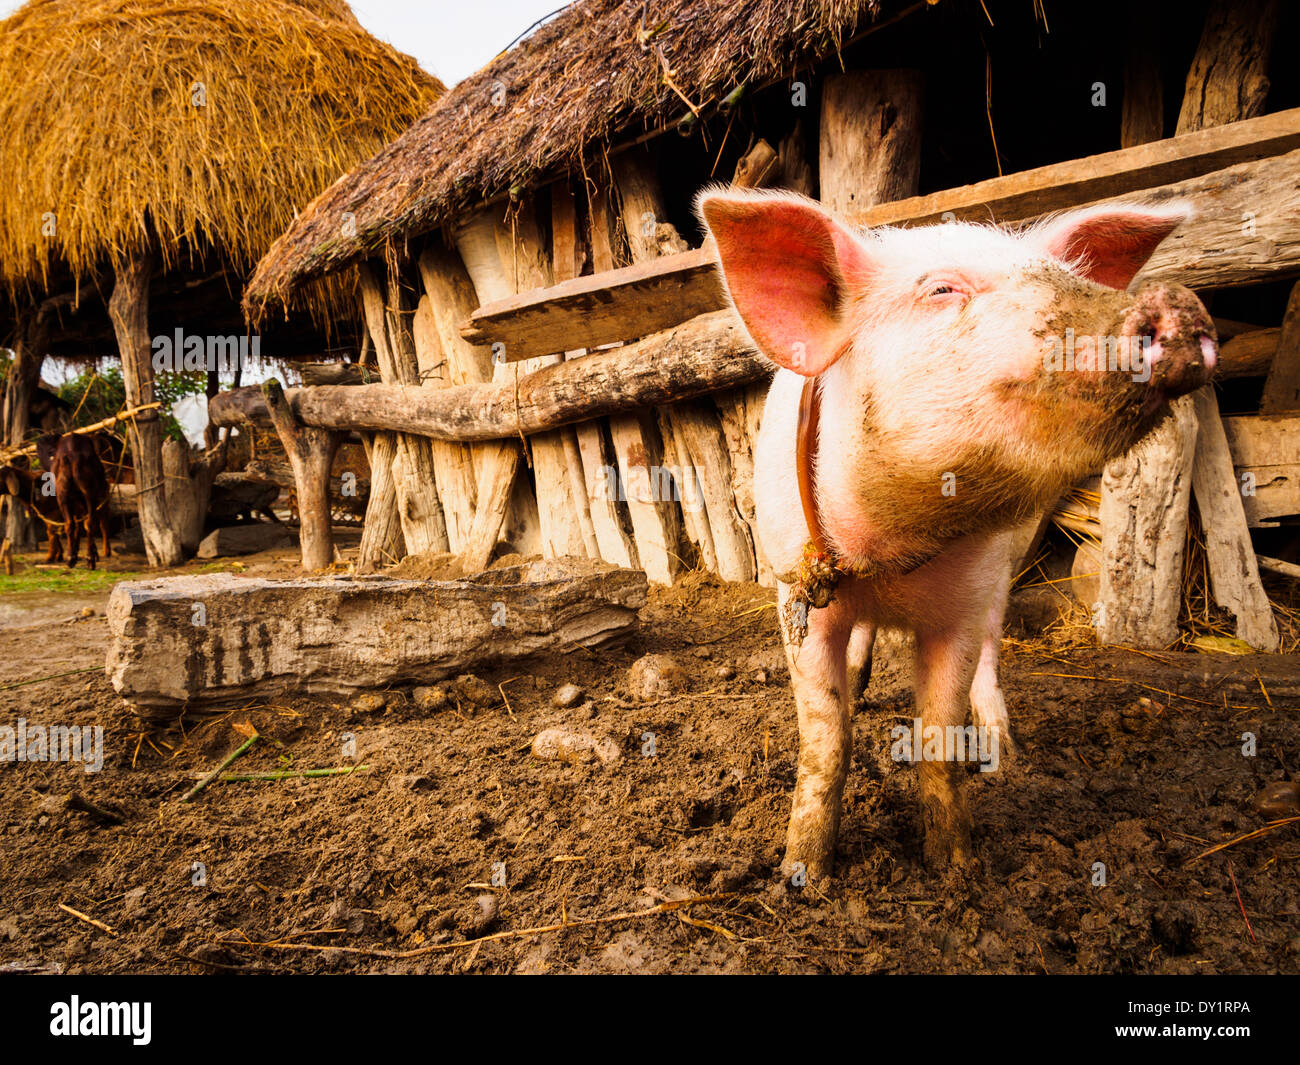 Livestock, including pigs, abound in the village of Thakurdwara, Nepal Stock Photo